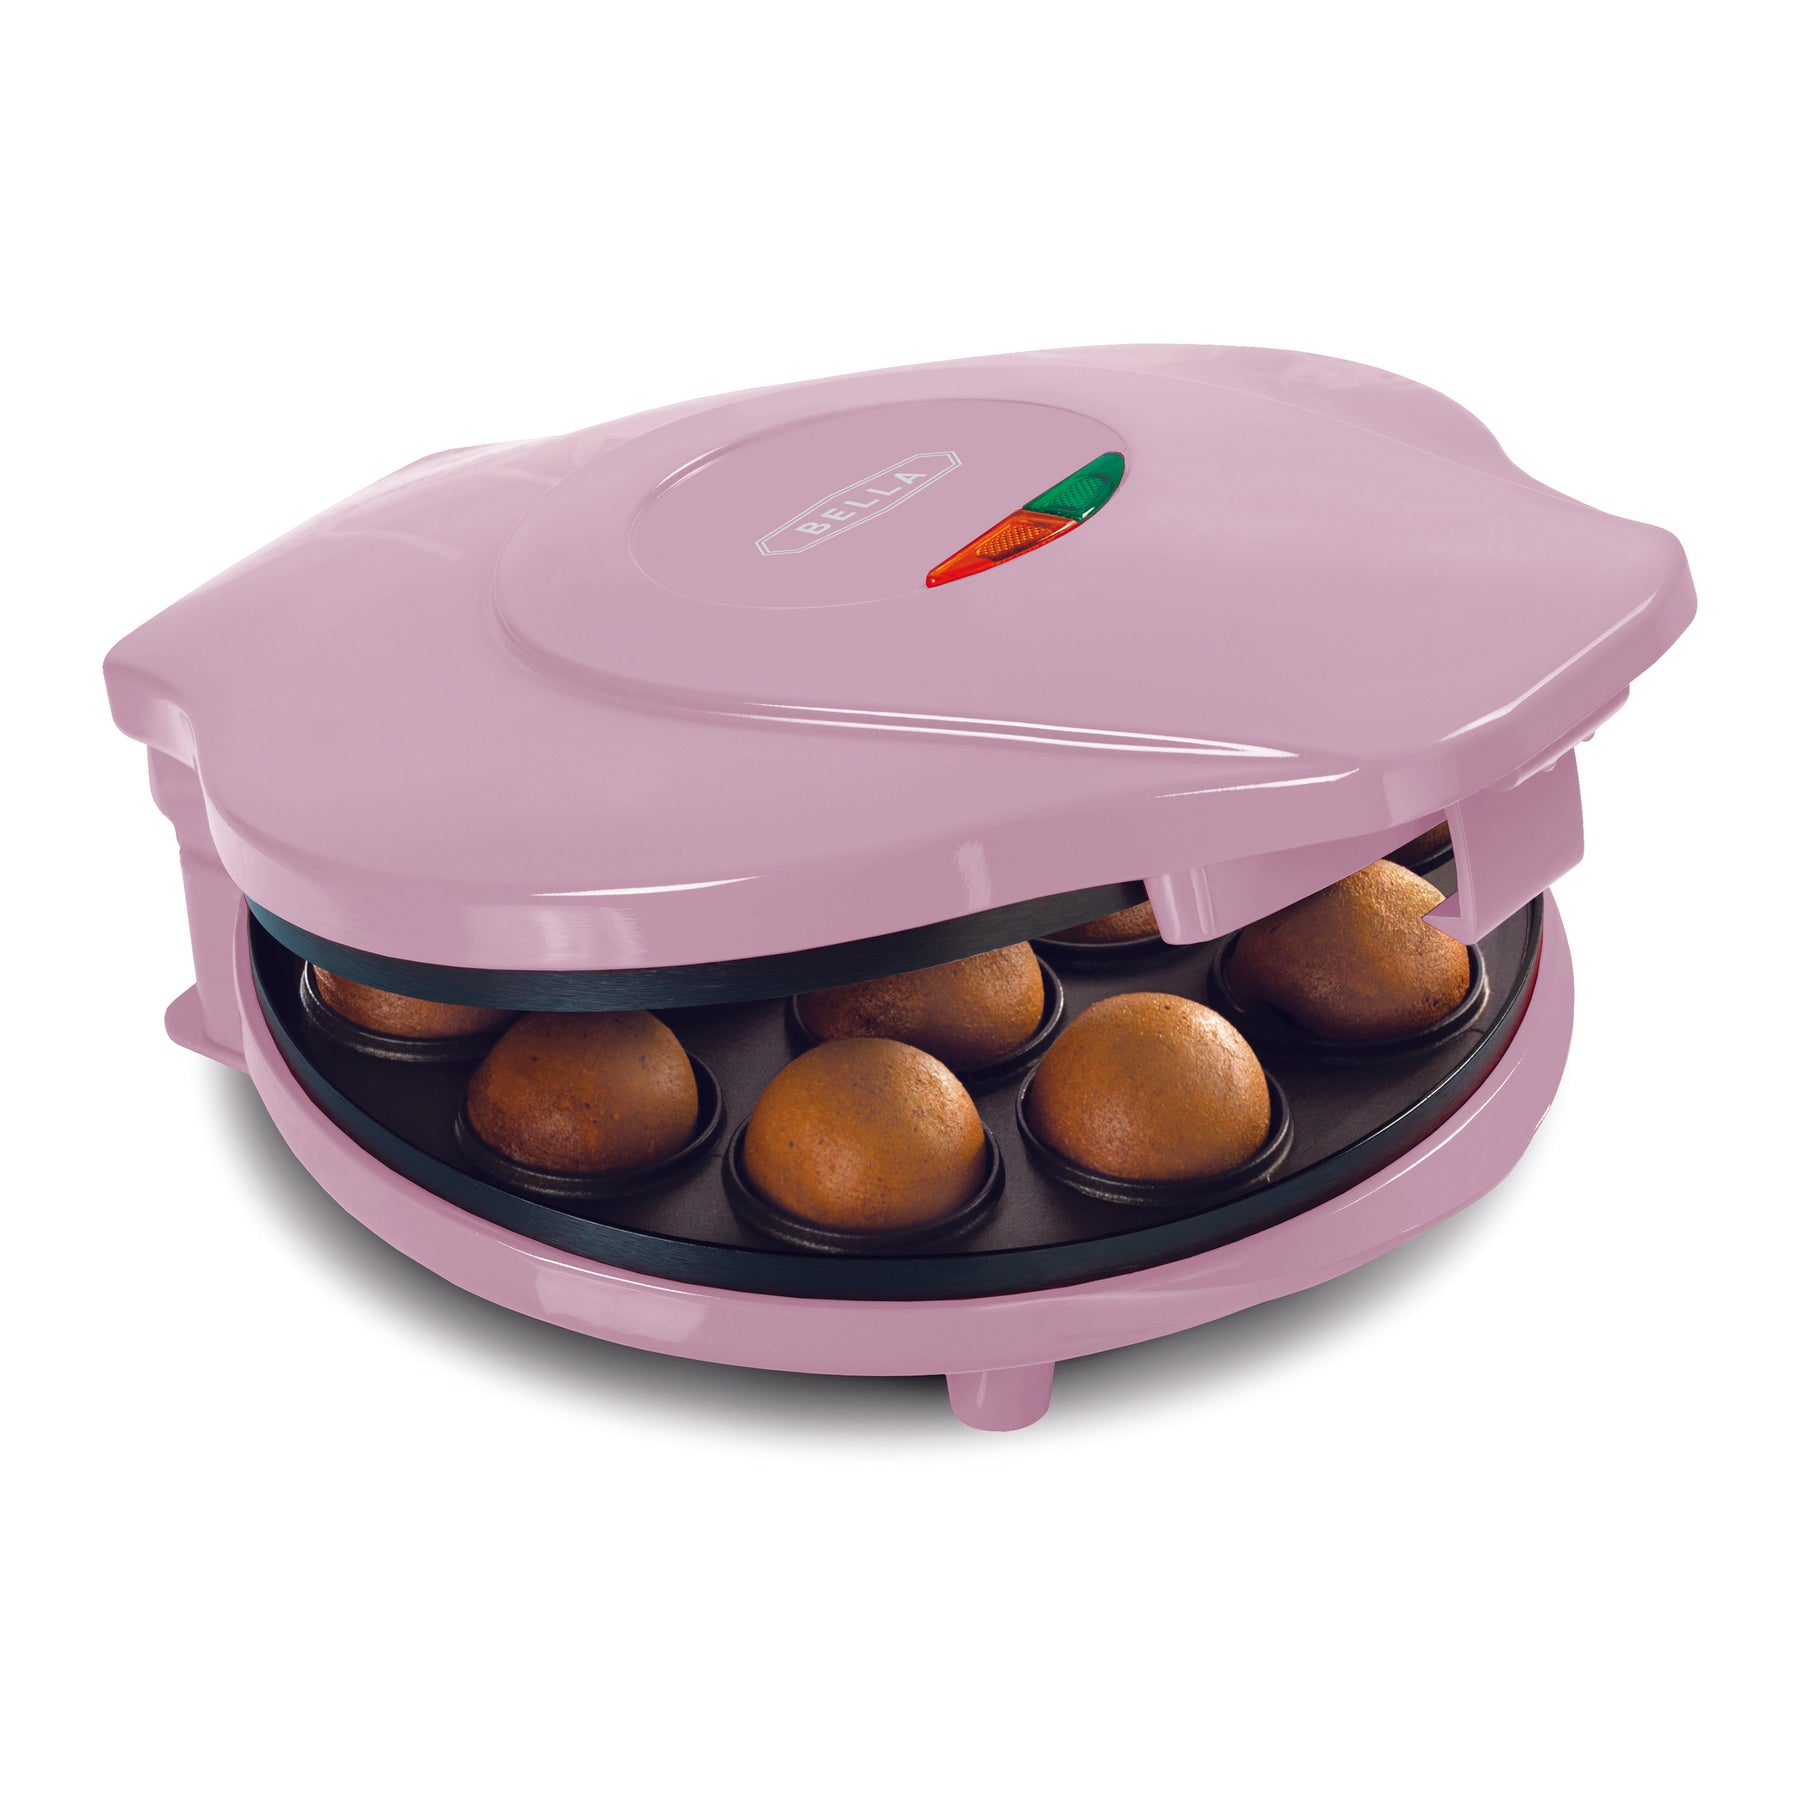 HOT* Bella Mini Cake Pop Maker and Waffle Maker only $4.93 each at